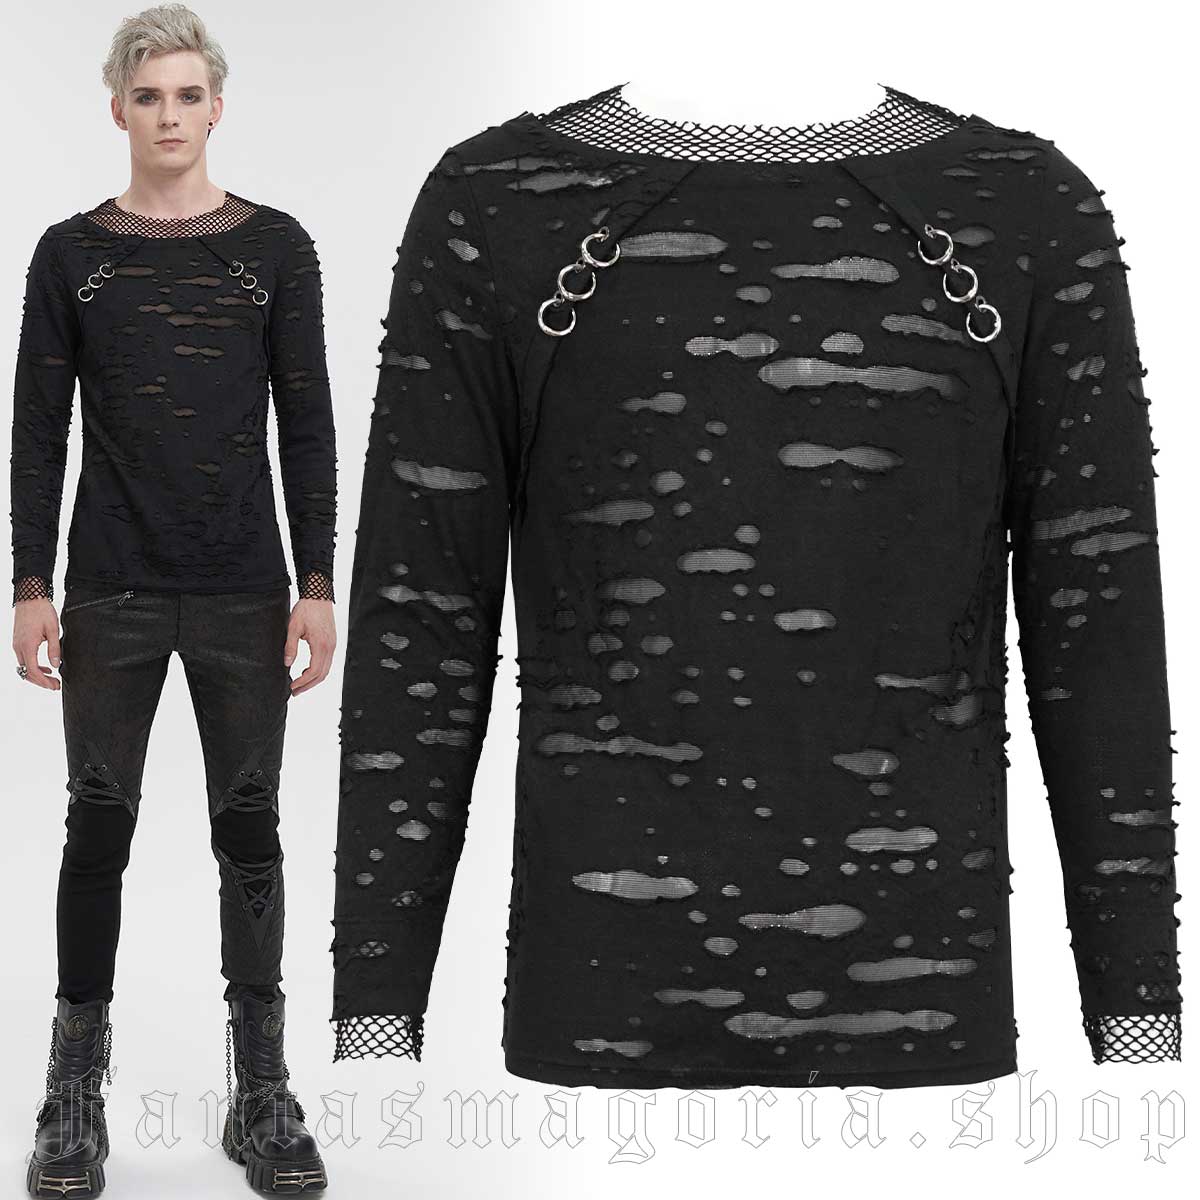 Men's Punk black long-sleeve distressed jersey and mesh fitted top. - Devil Fashion - TT227